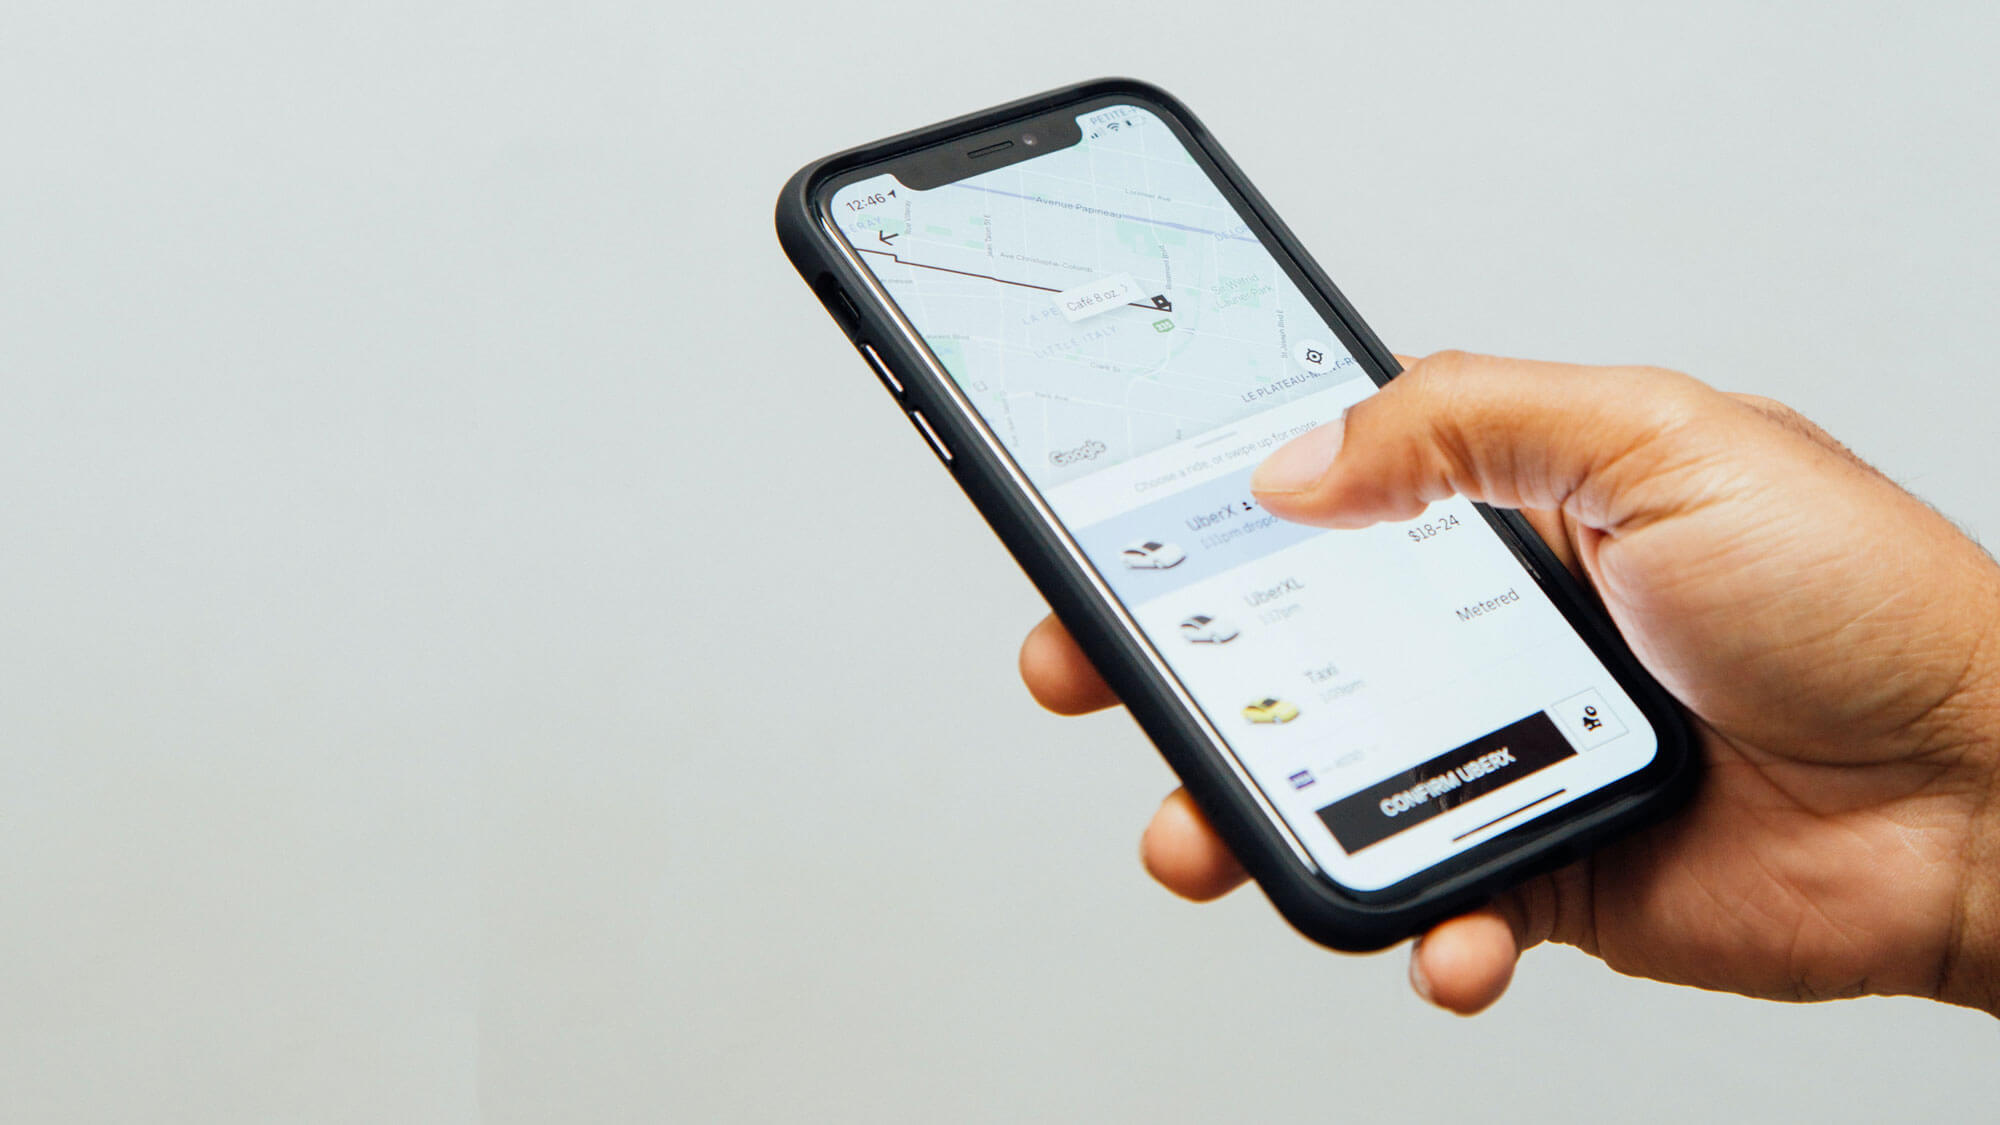 Uber is a great example of dynamic pricing and the importance of price transparency